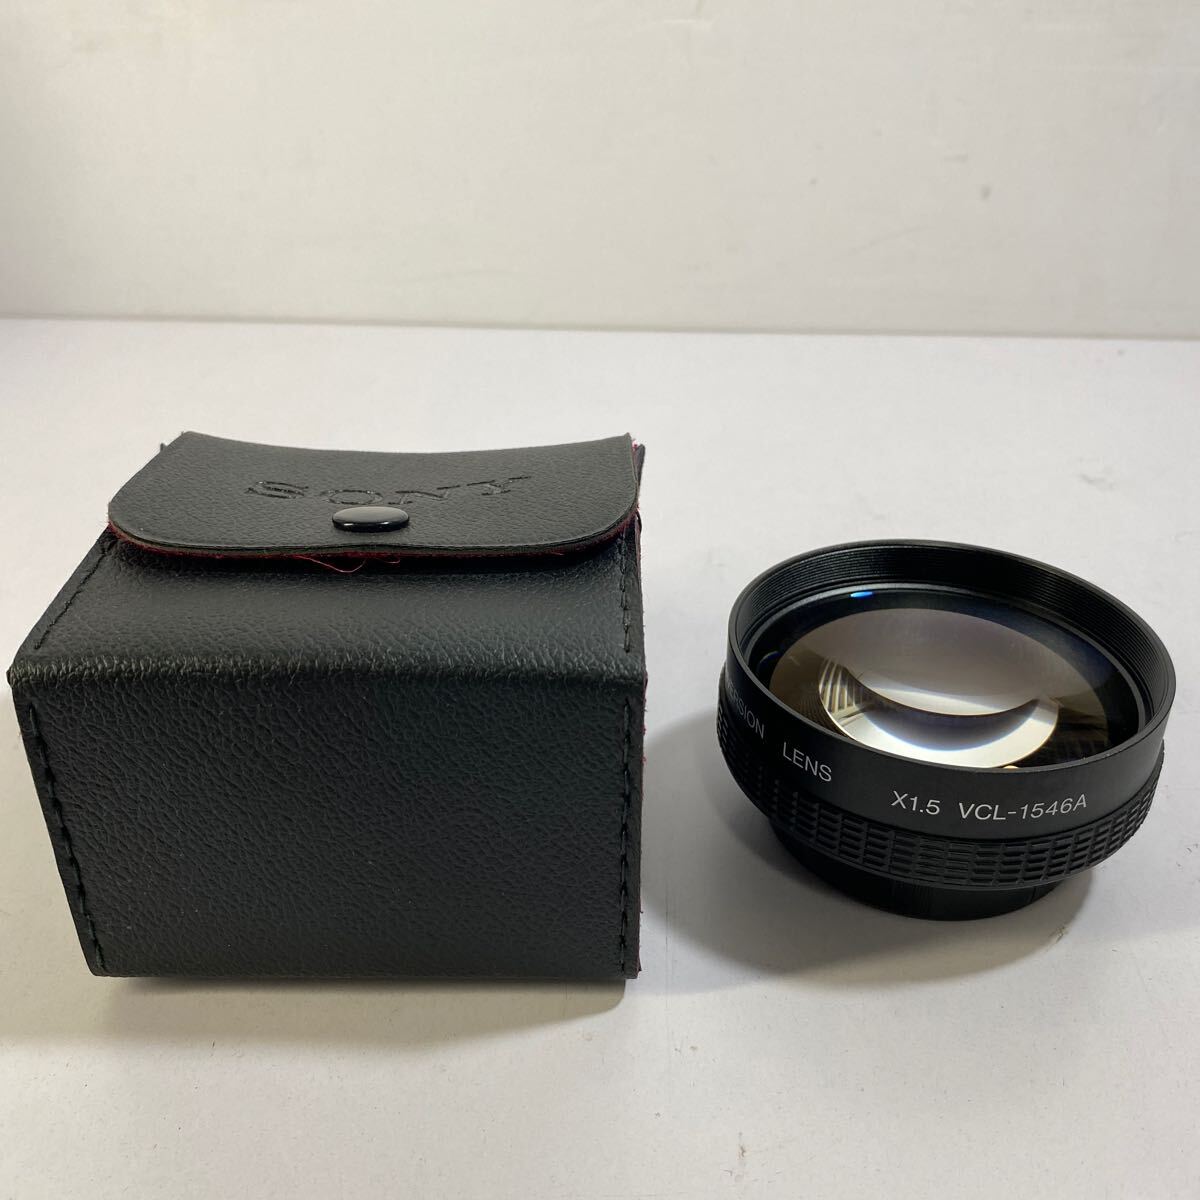 [9] Sony (SONY)tere conversion lens VCL-1546A